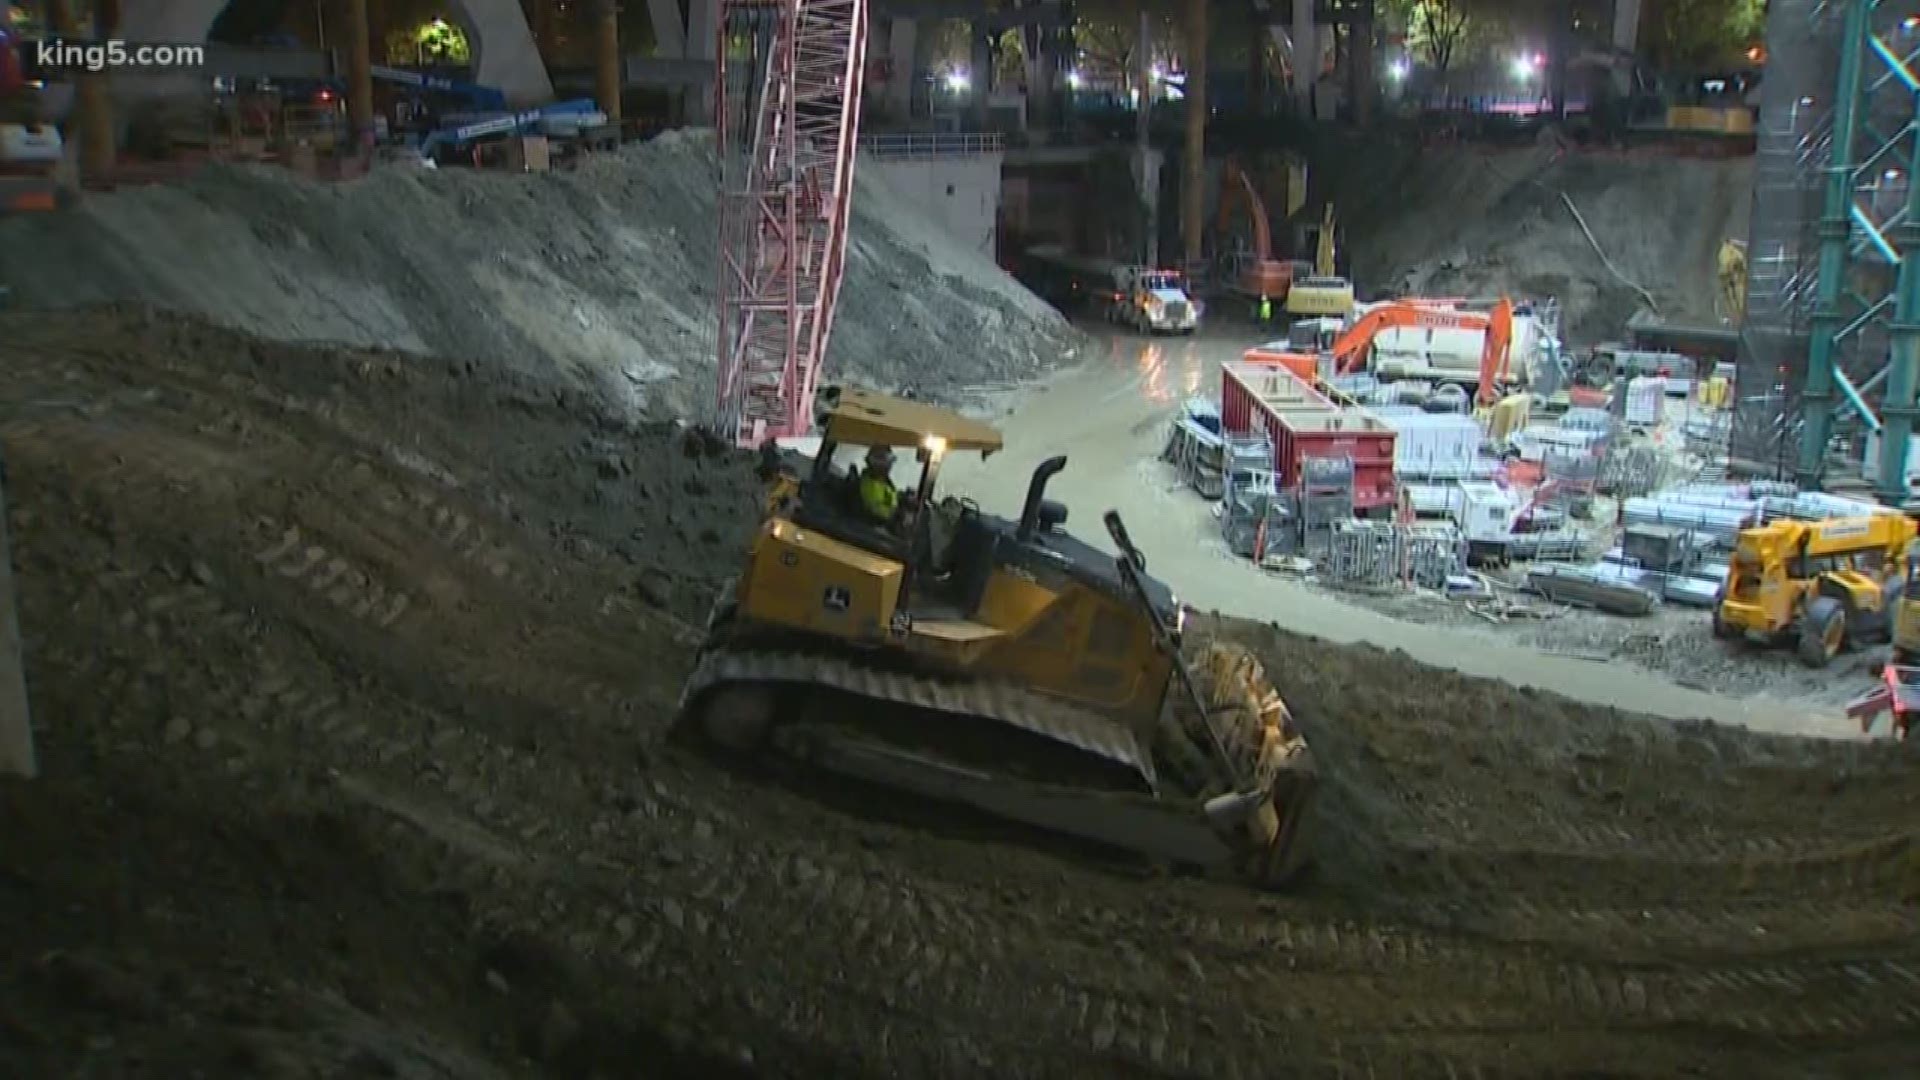 Construction on the new arena in Seattle Center is well underway, and tonight we have an exclusive look at where the "big dig" dirt is going.